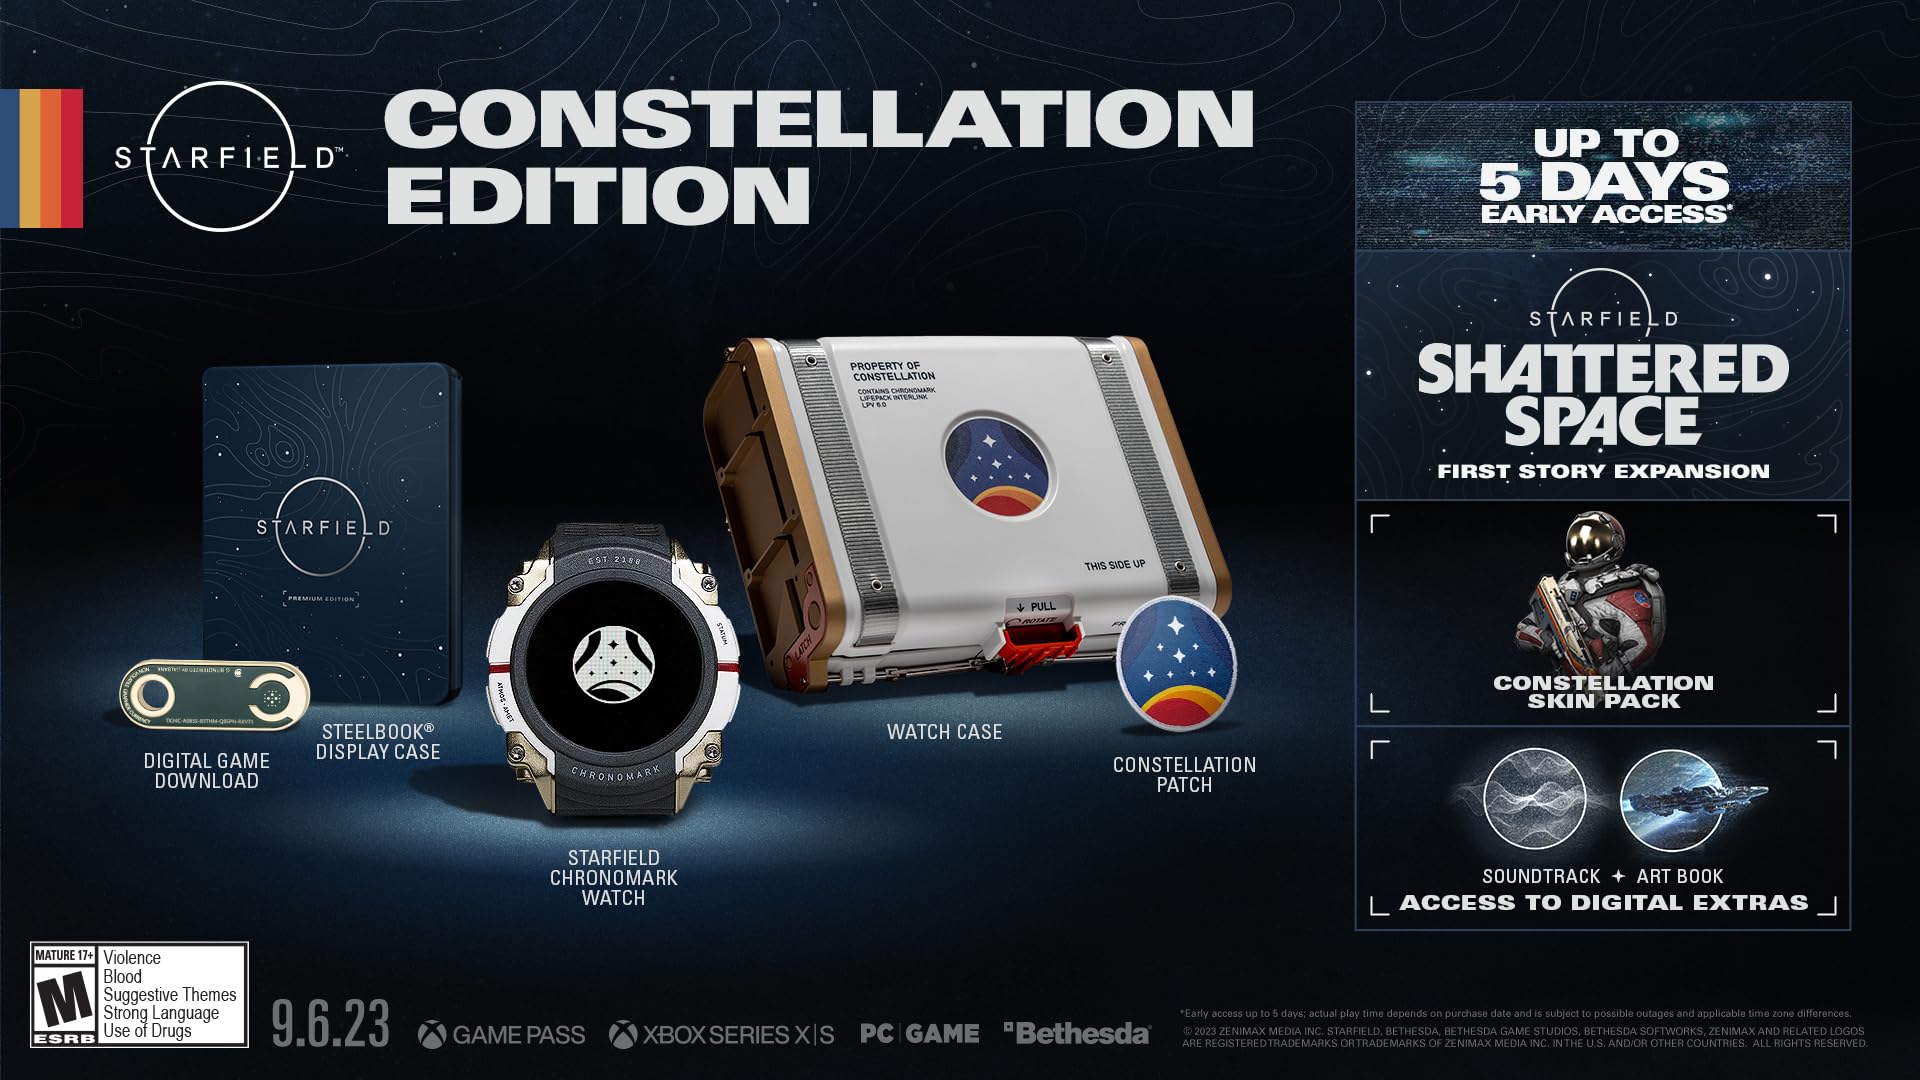 Starfield: Constellation Edition - PC (not playable until 9/1)